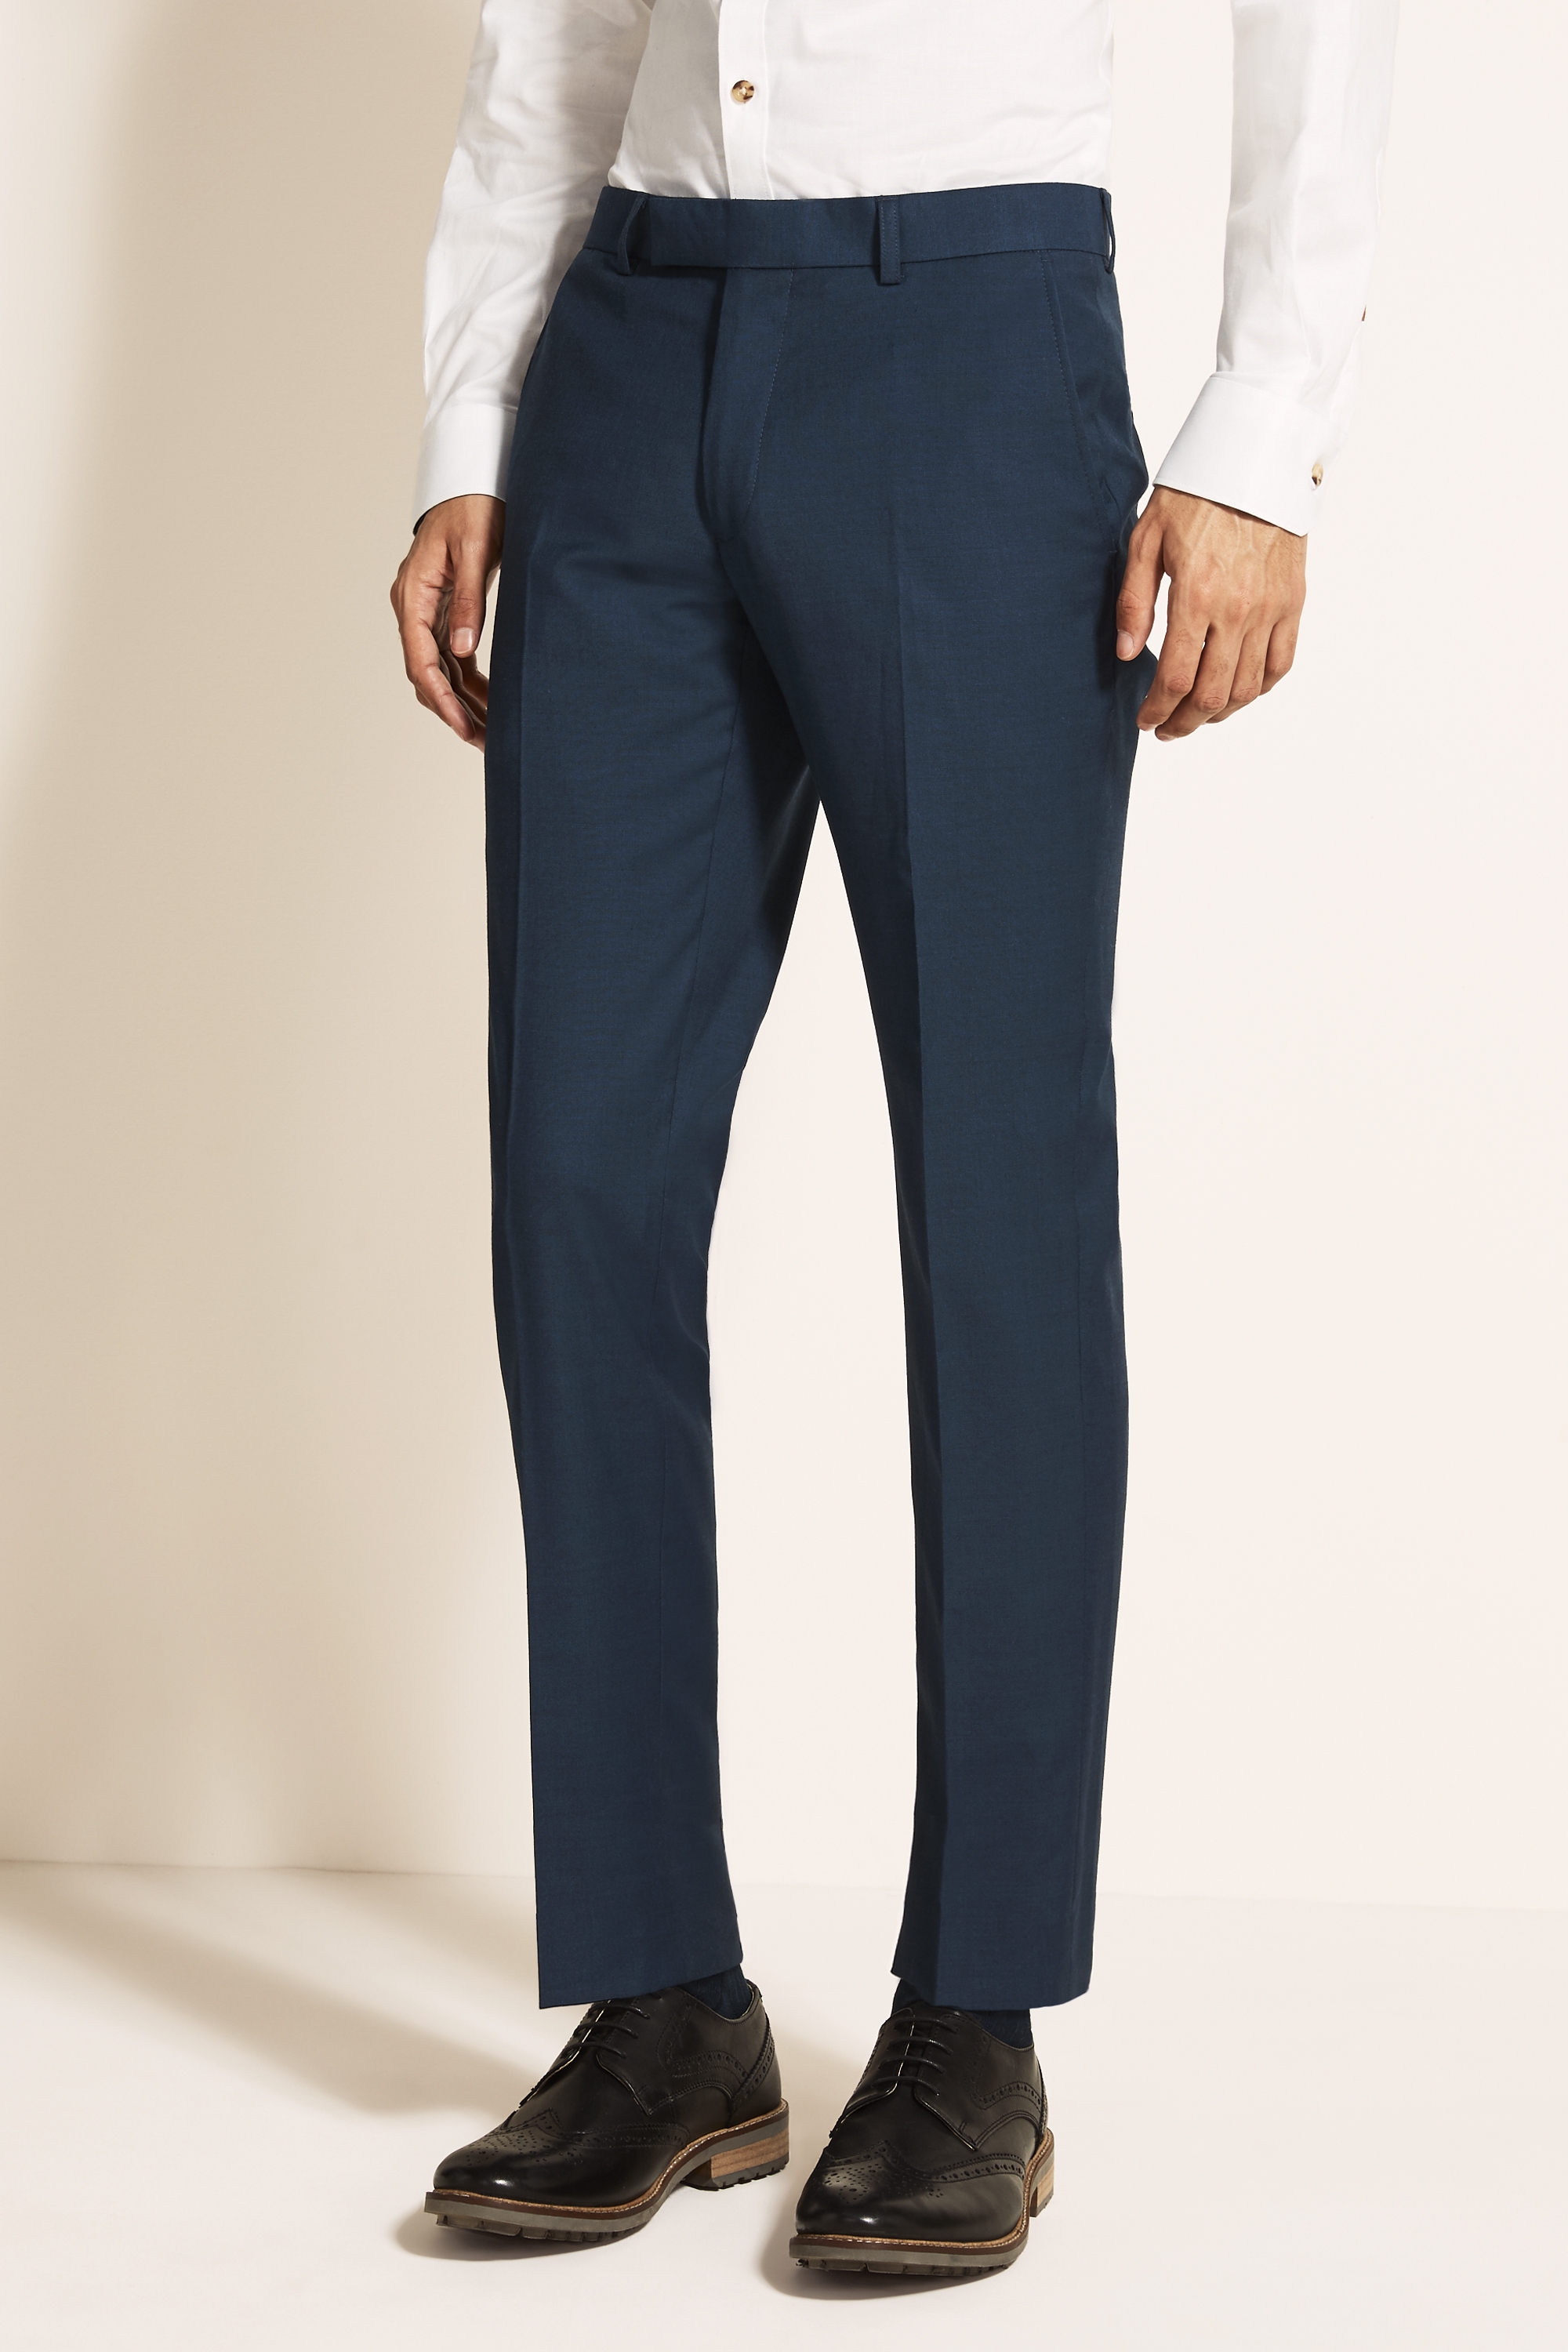 Slim Fit Blue Stretch Trousers | Buy Online at Moss